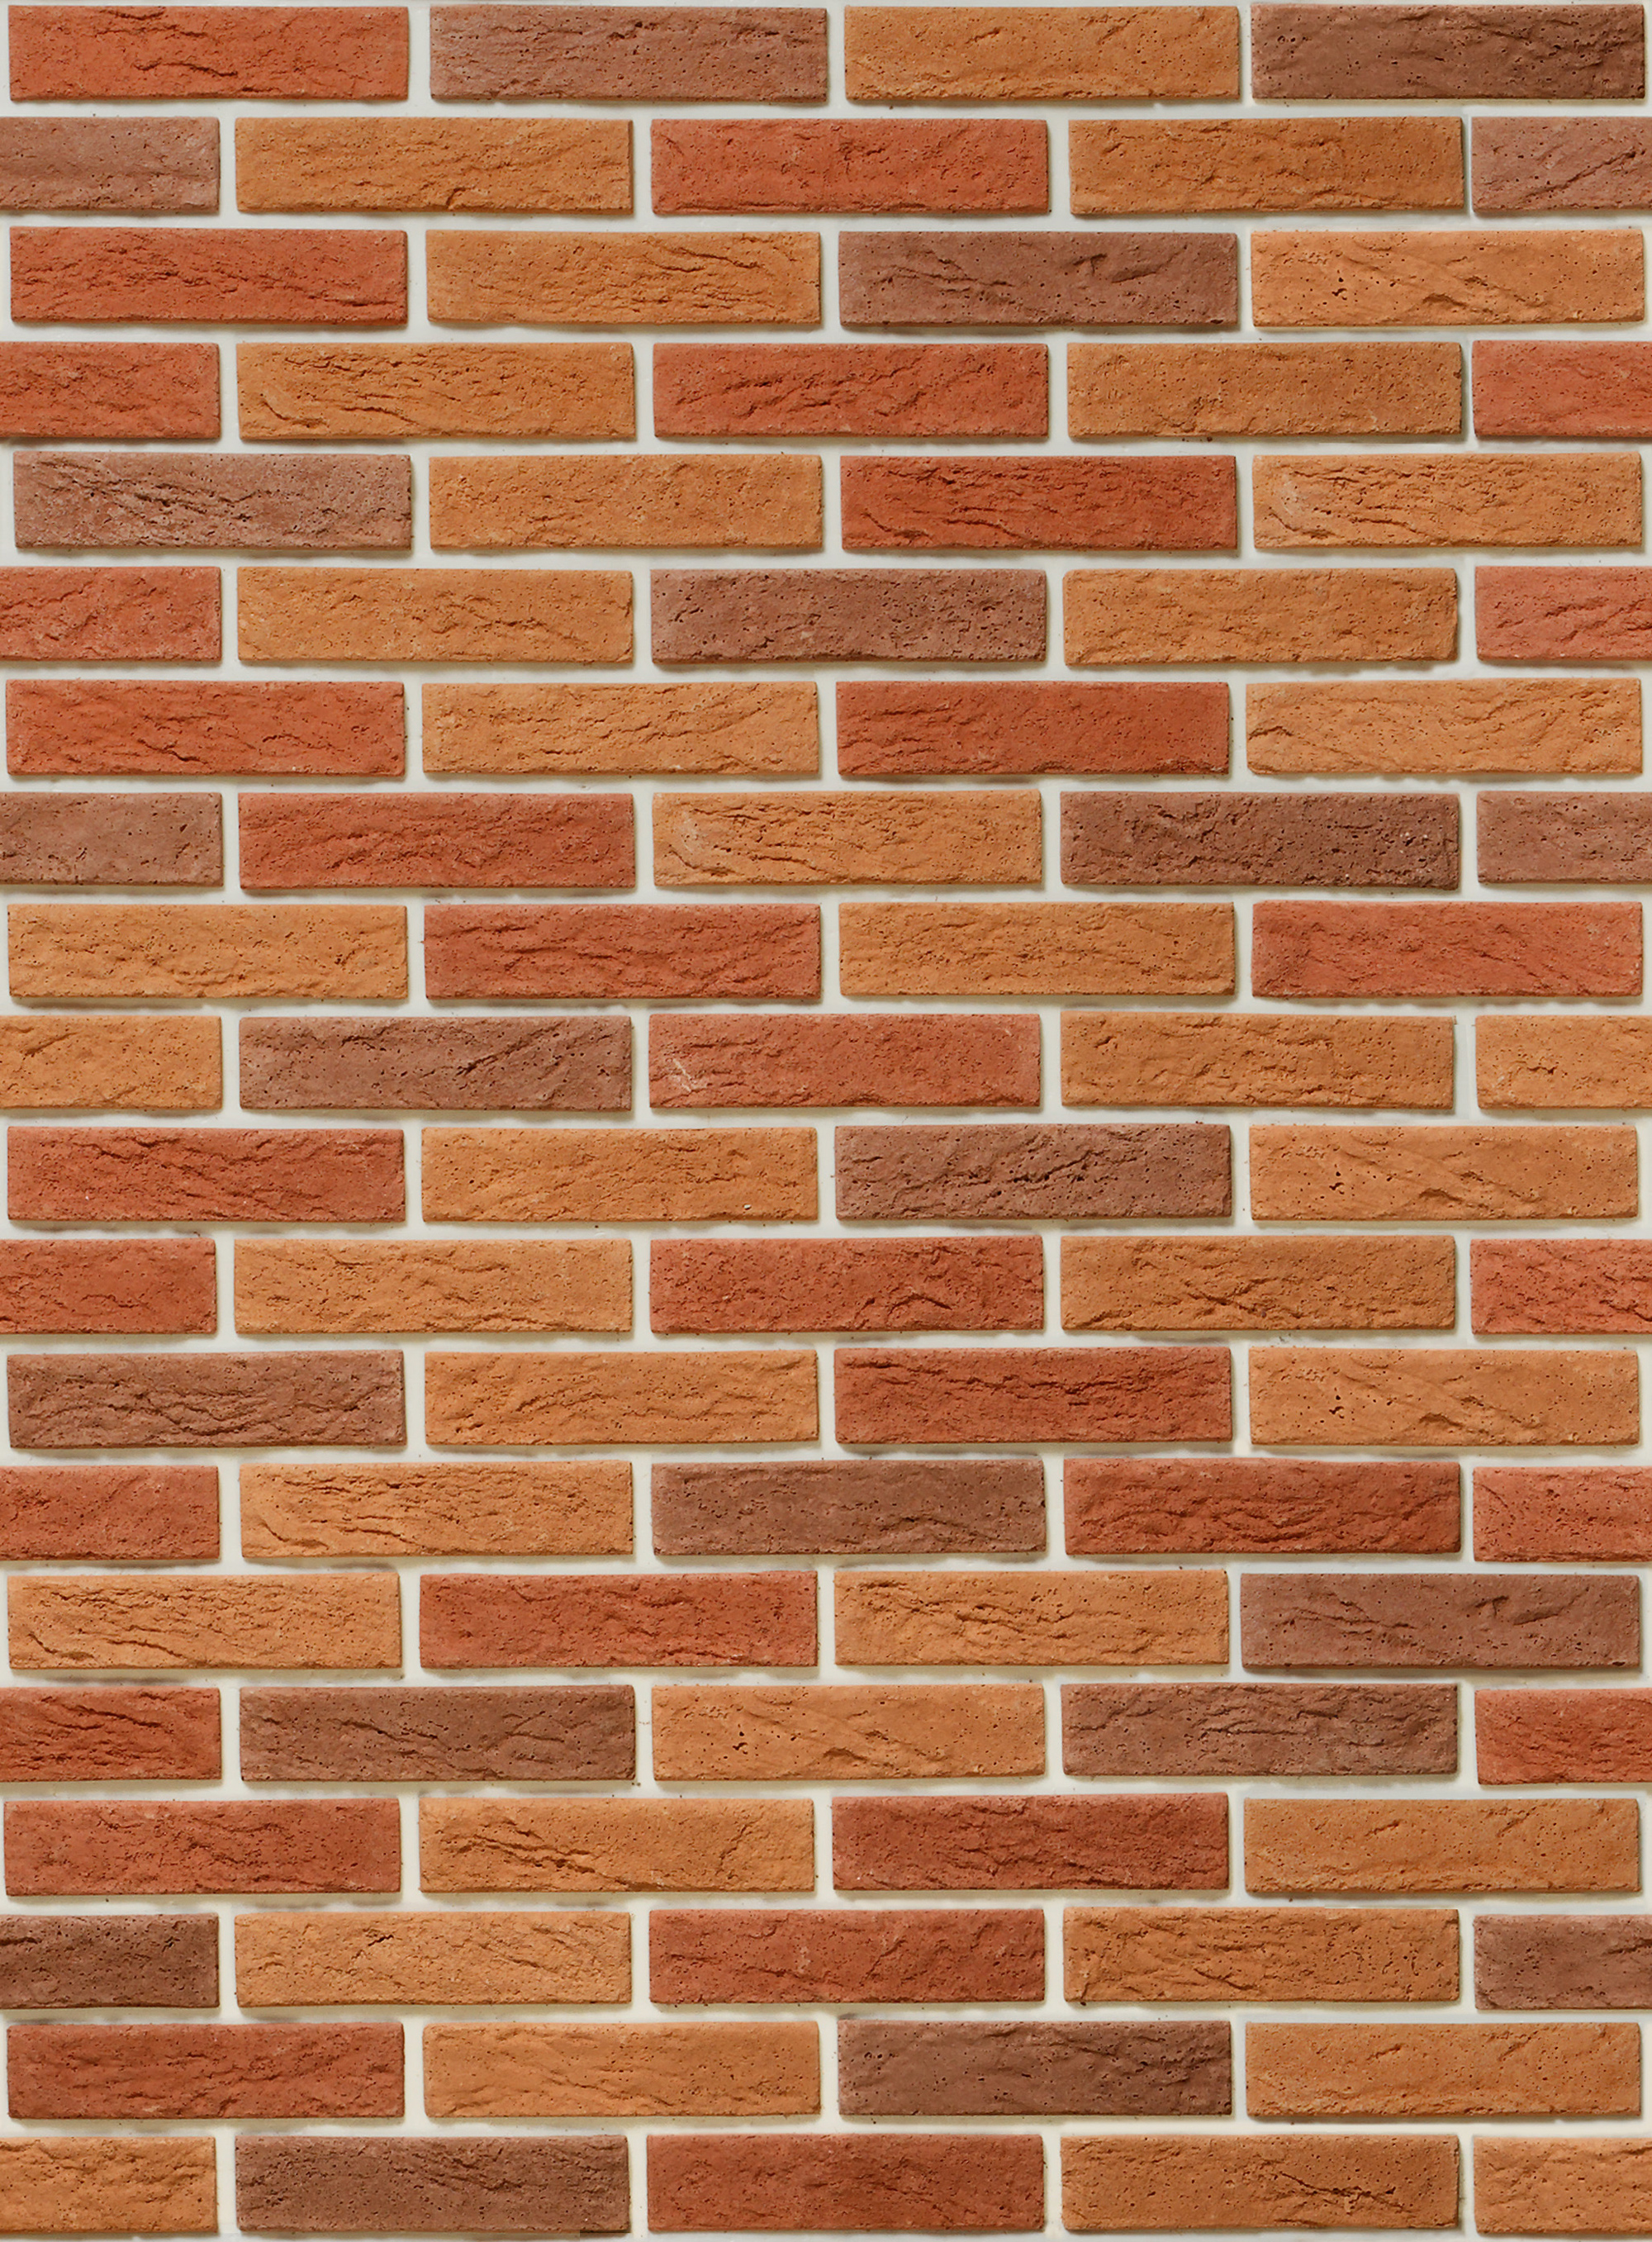 Brick Background Gallery Yopriceville High Quality Image And